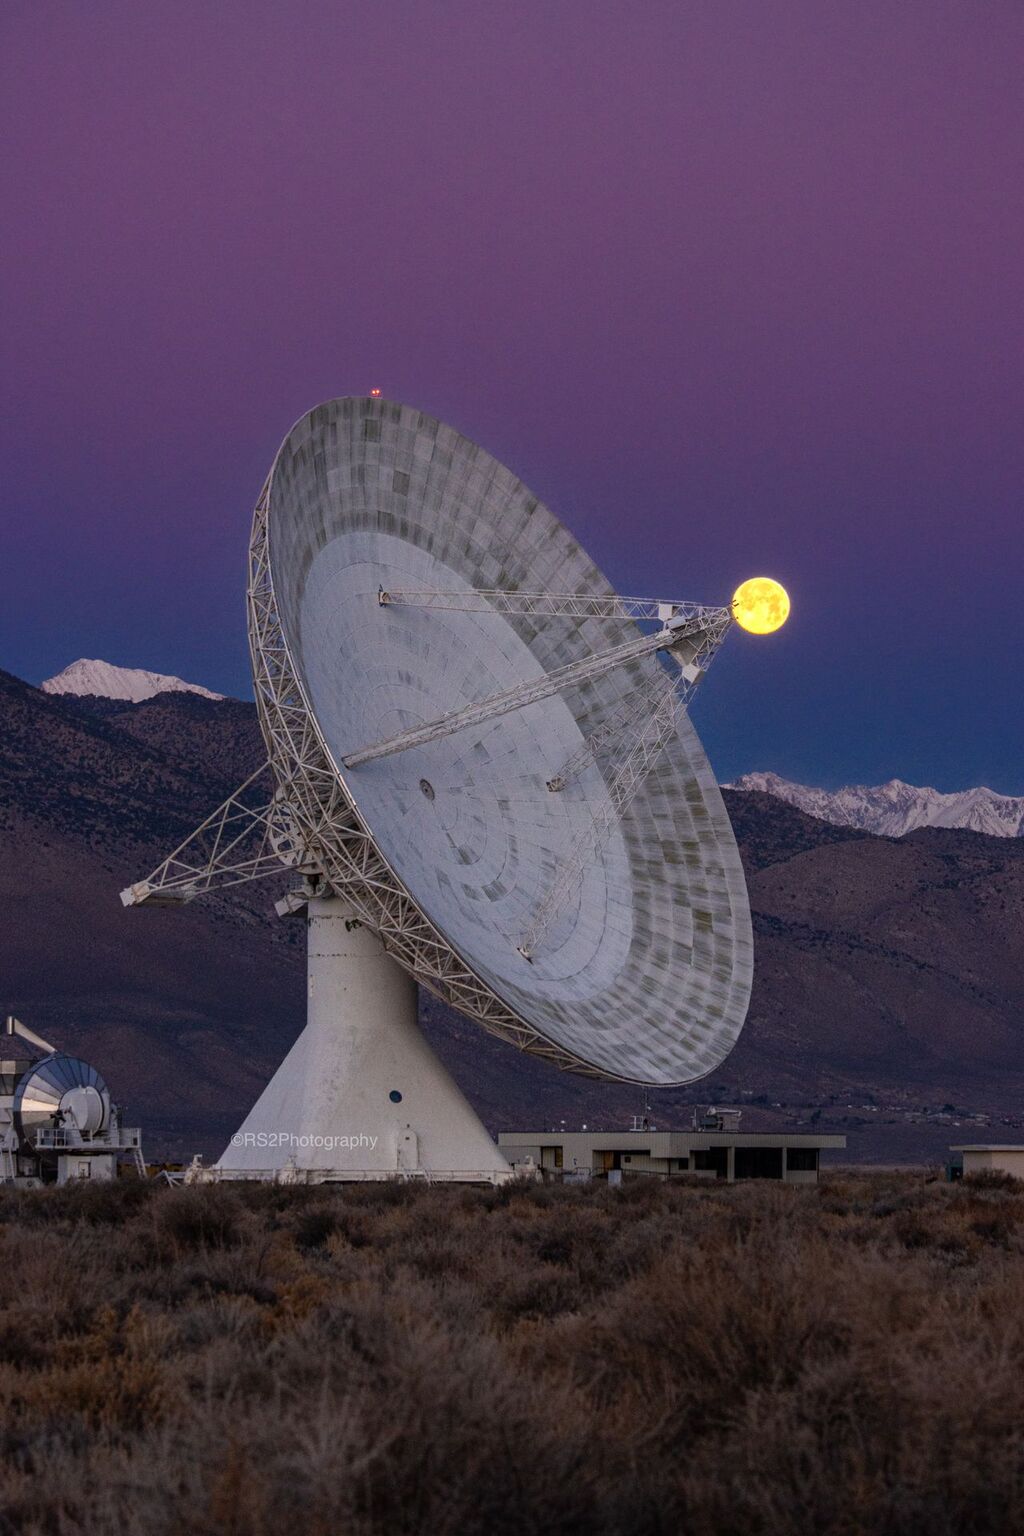 Owens Valley Radio Observatory at sunset